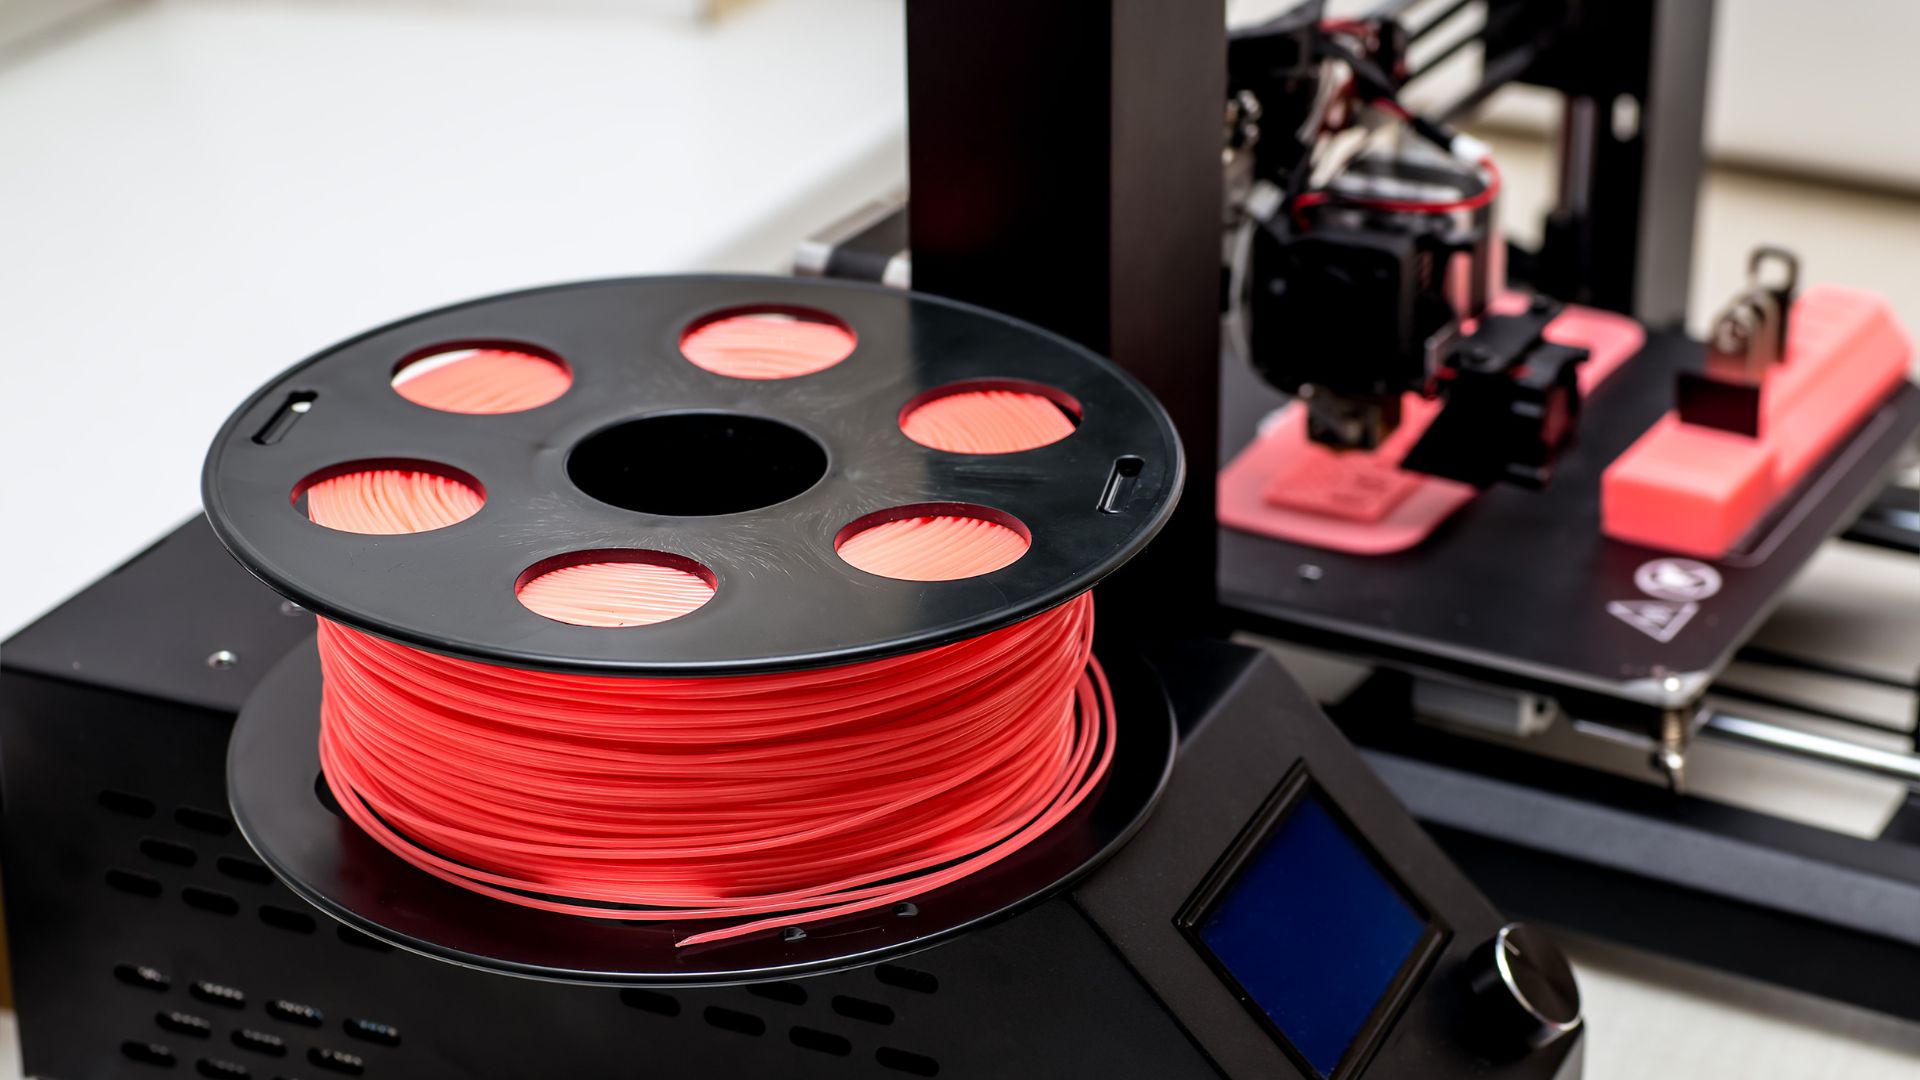 8 Interesting Facts About 3D Printing You Might Not Know